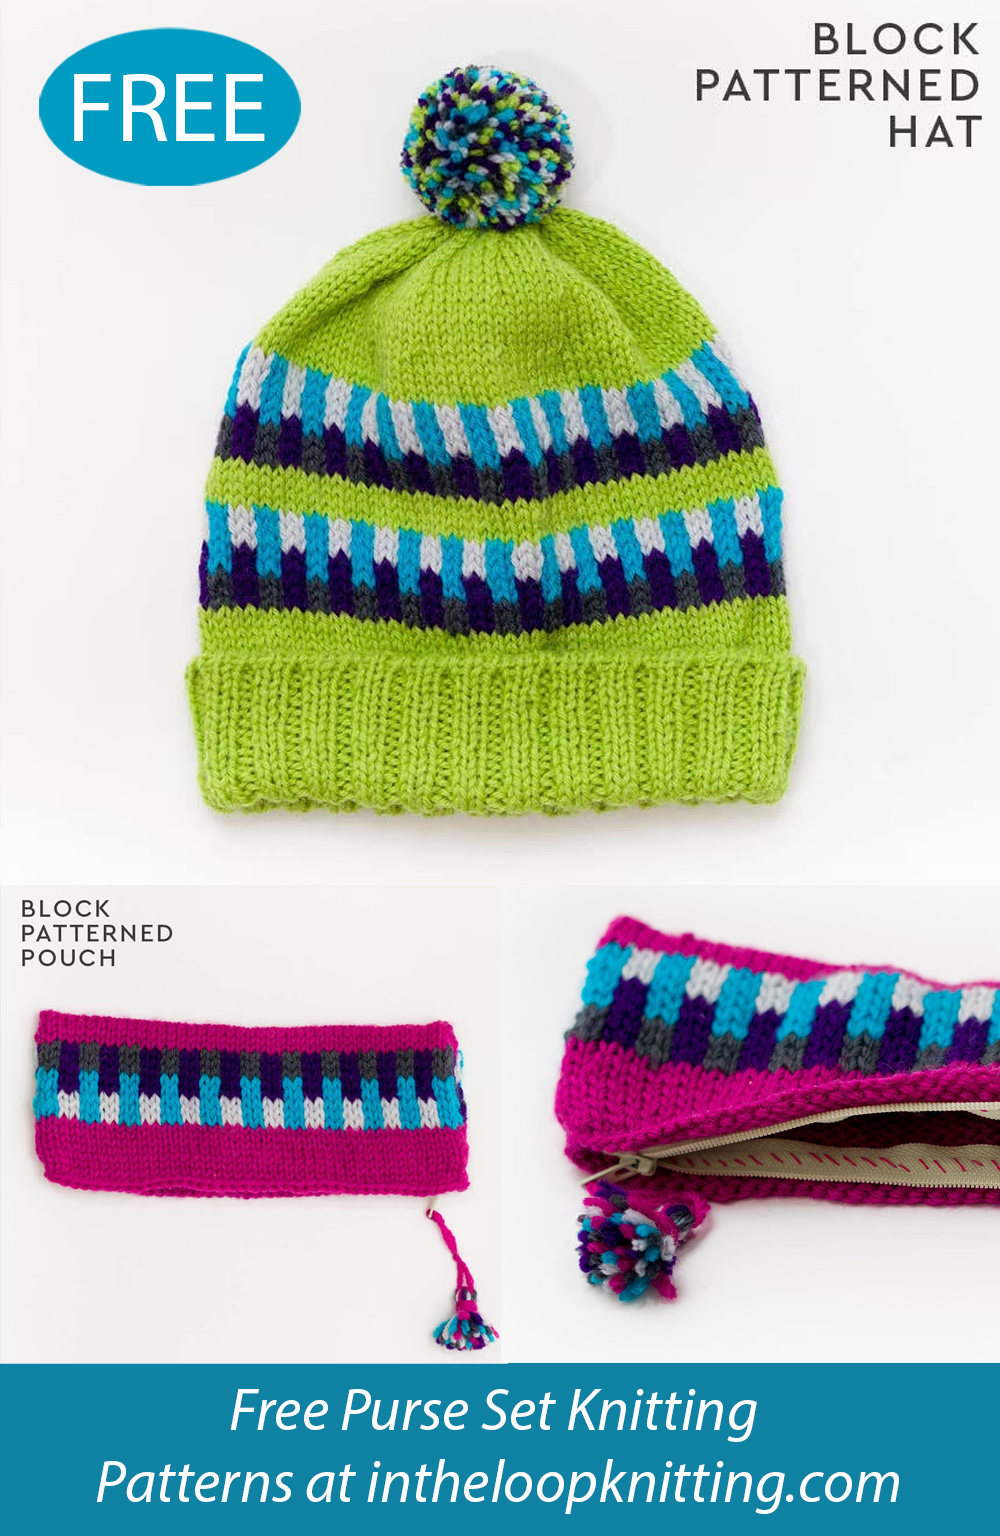 Free Hat and Pouch Knitting Pattern Set